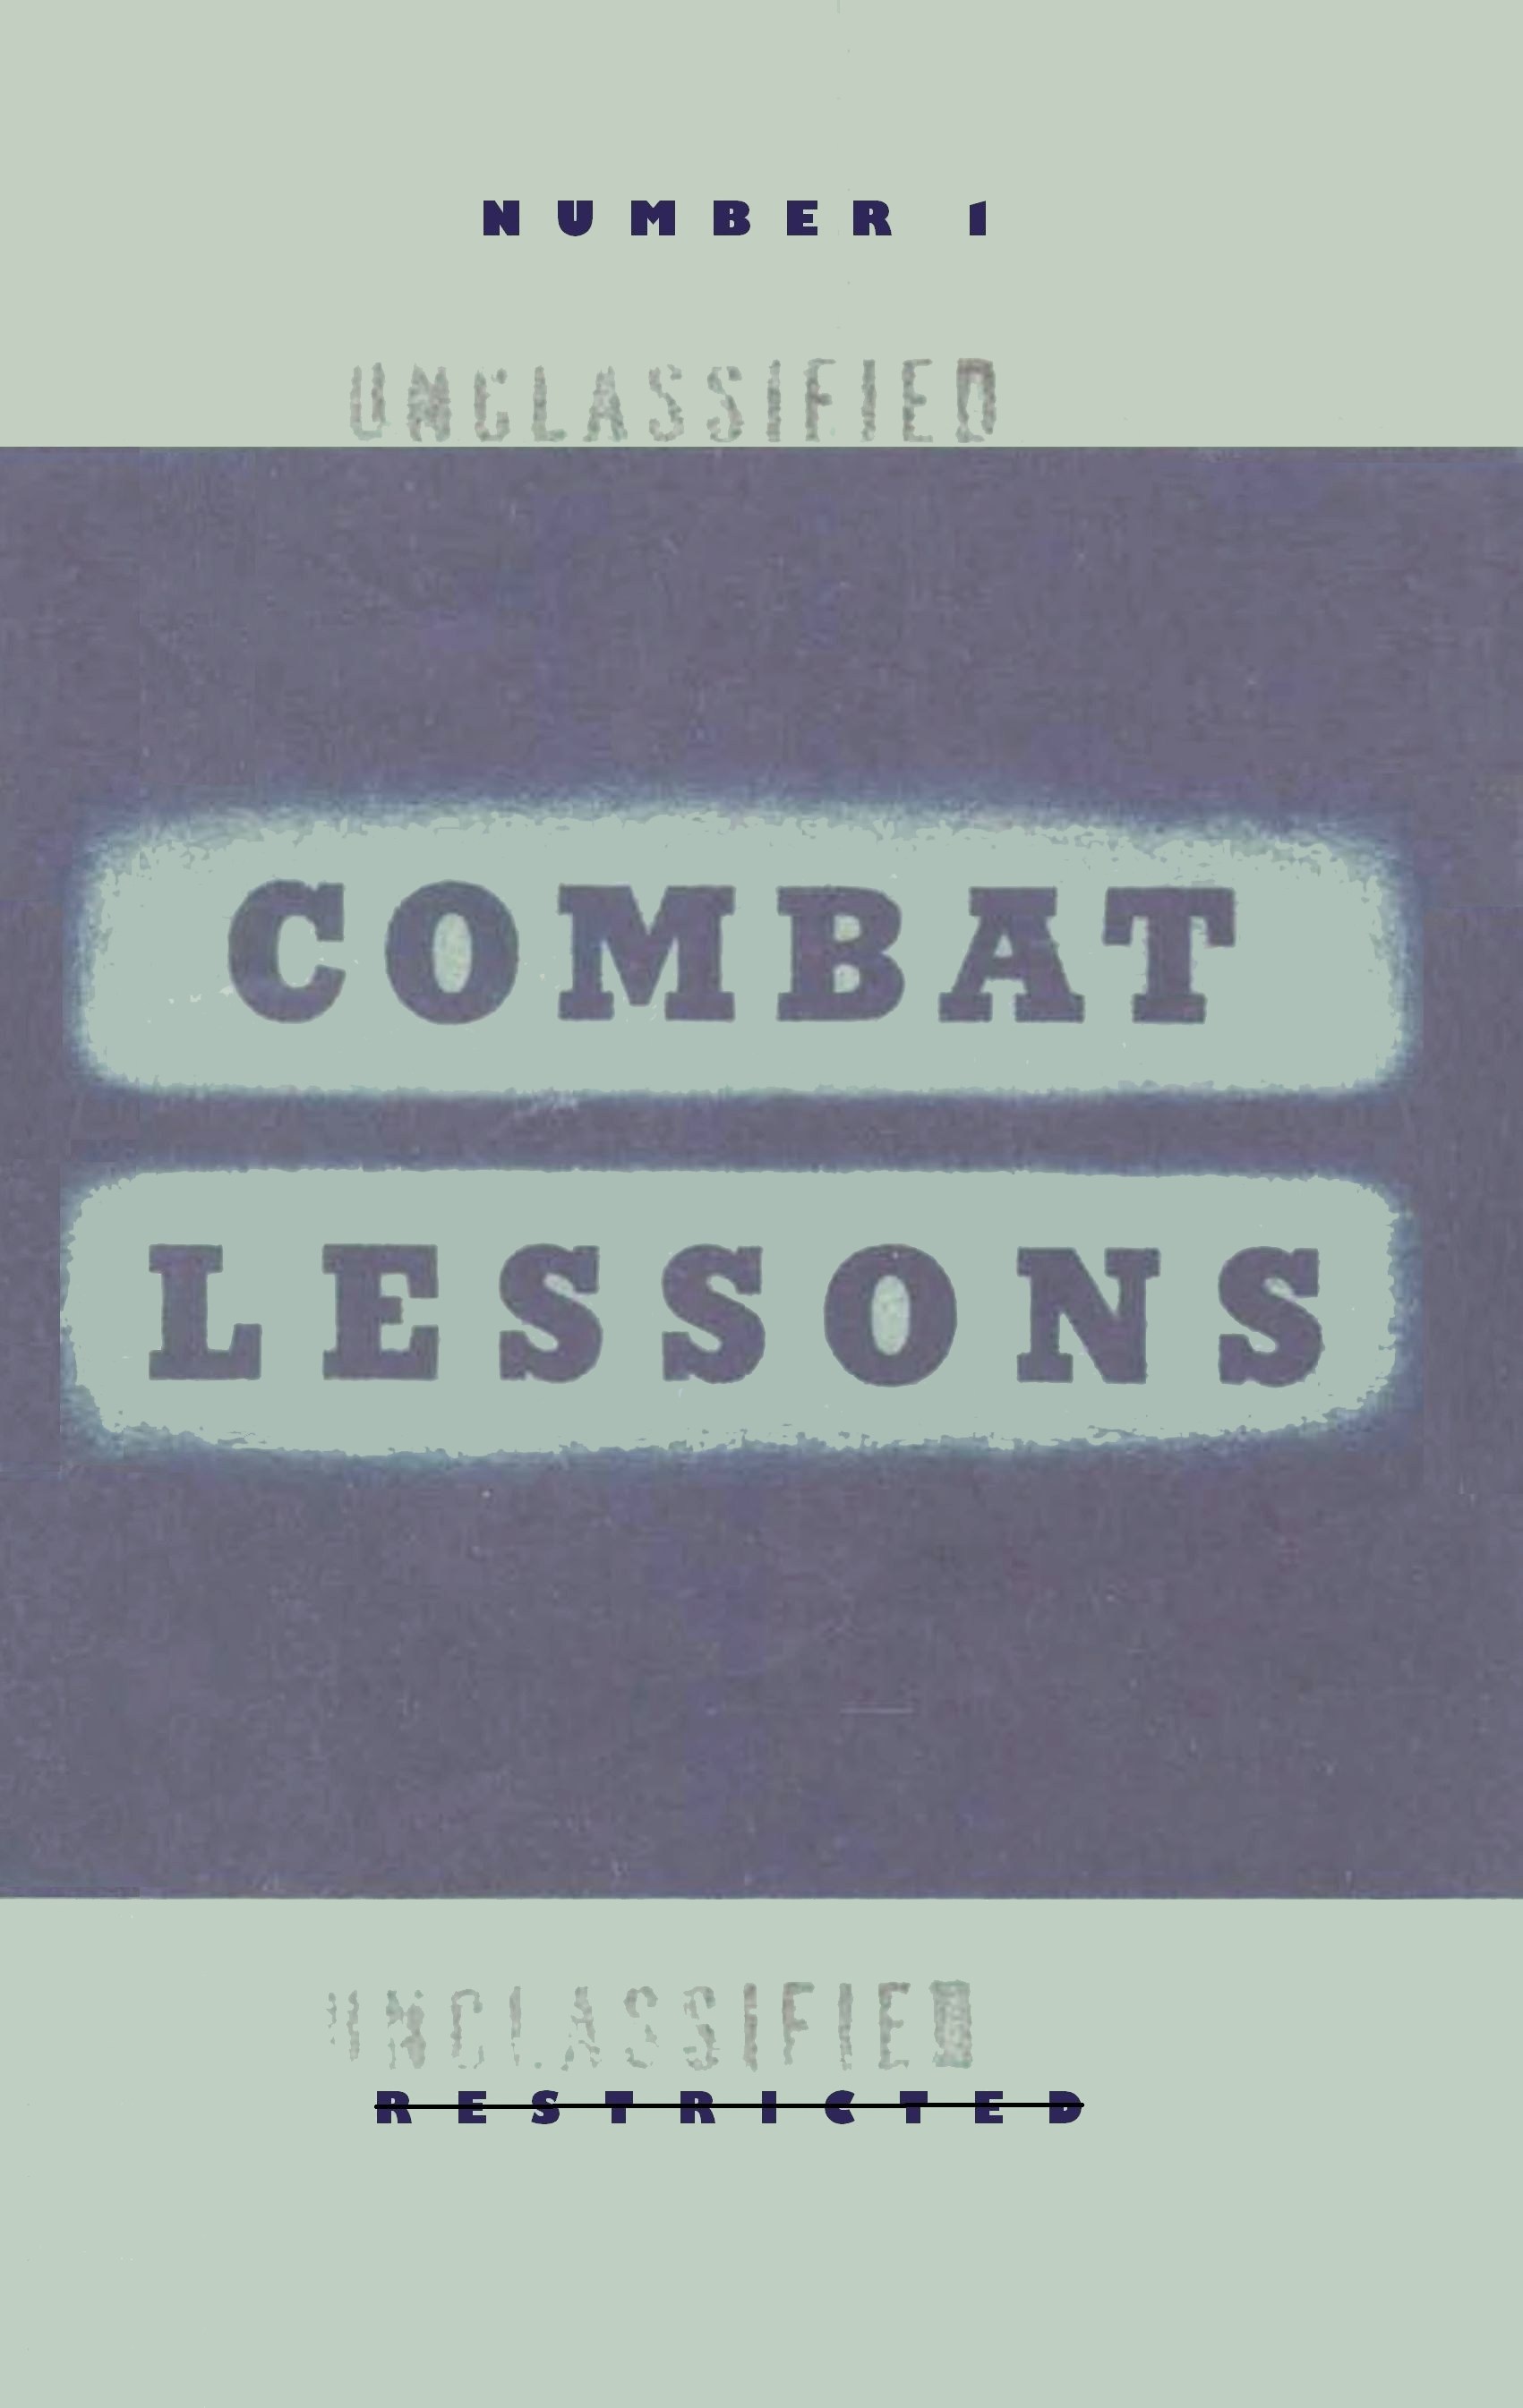 Combat lessons, no. 1, rank and file in combat